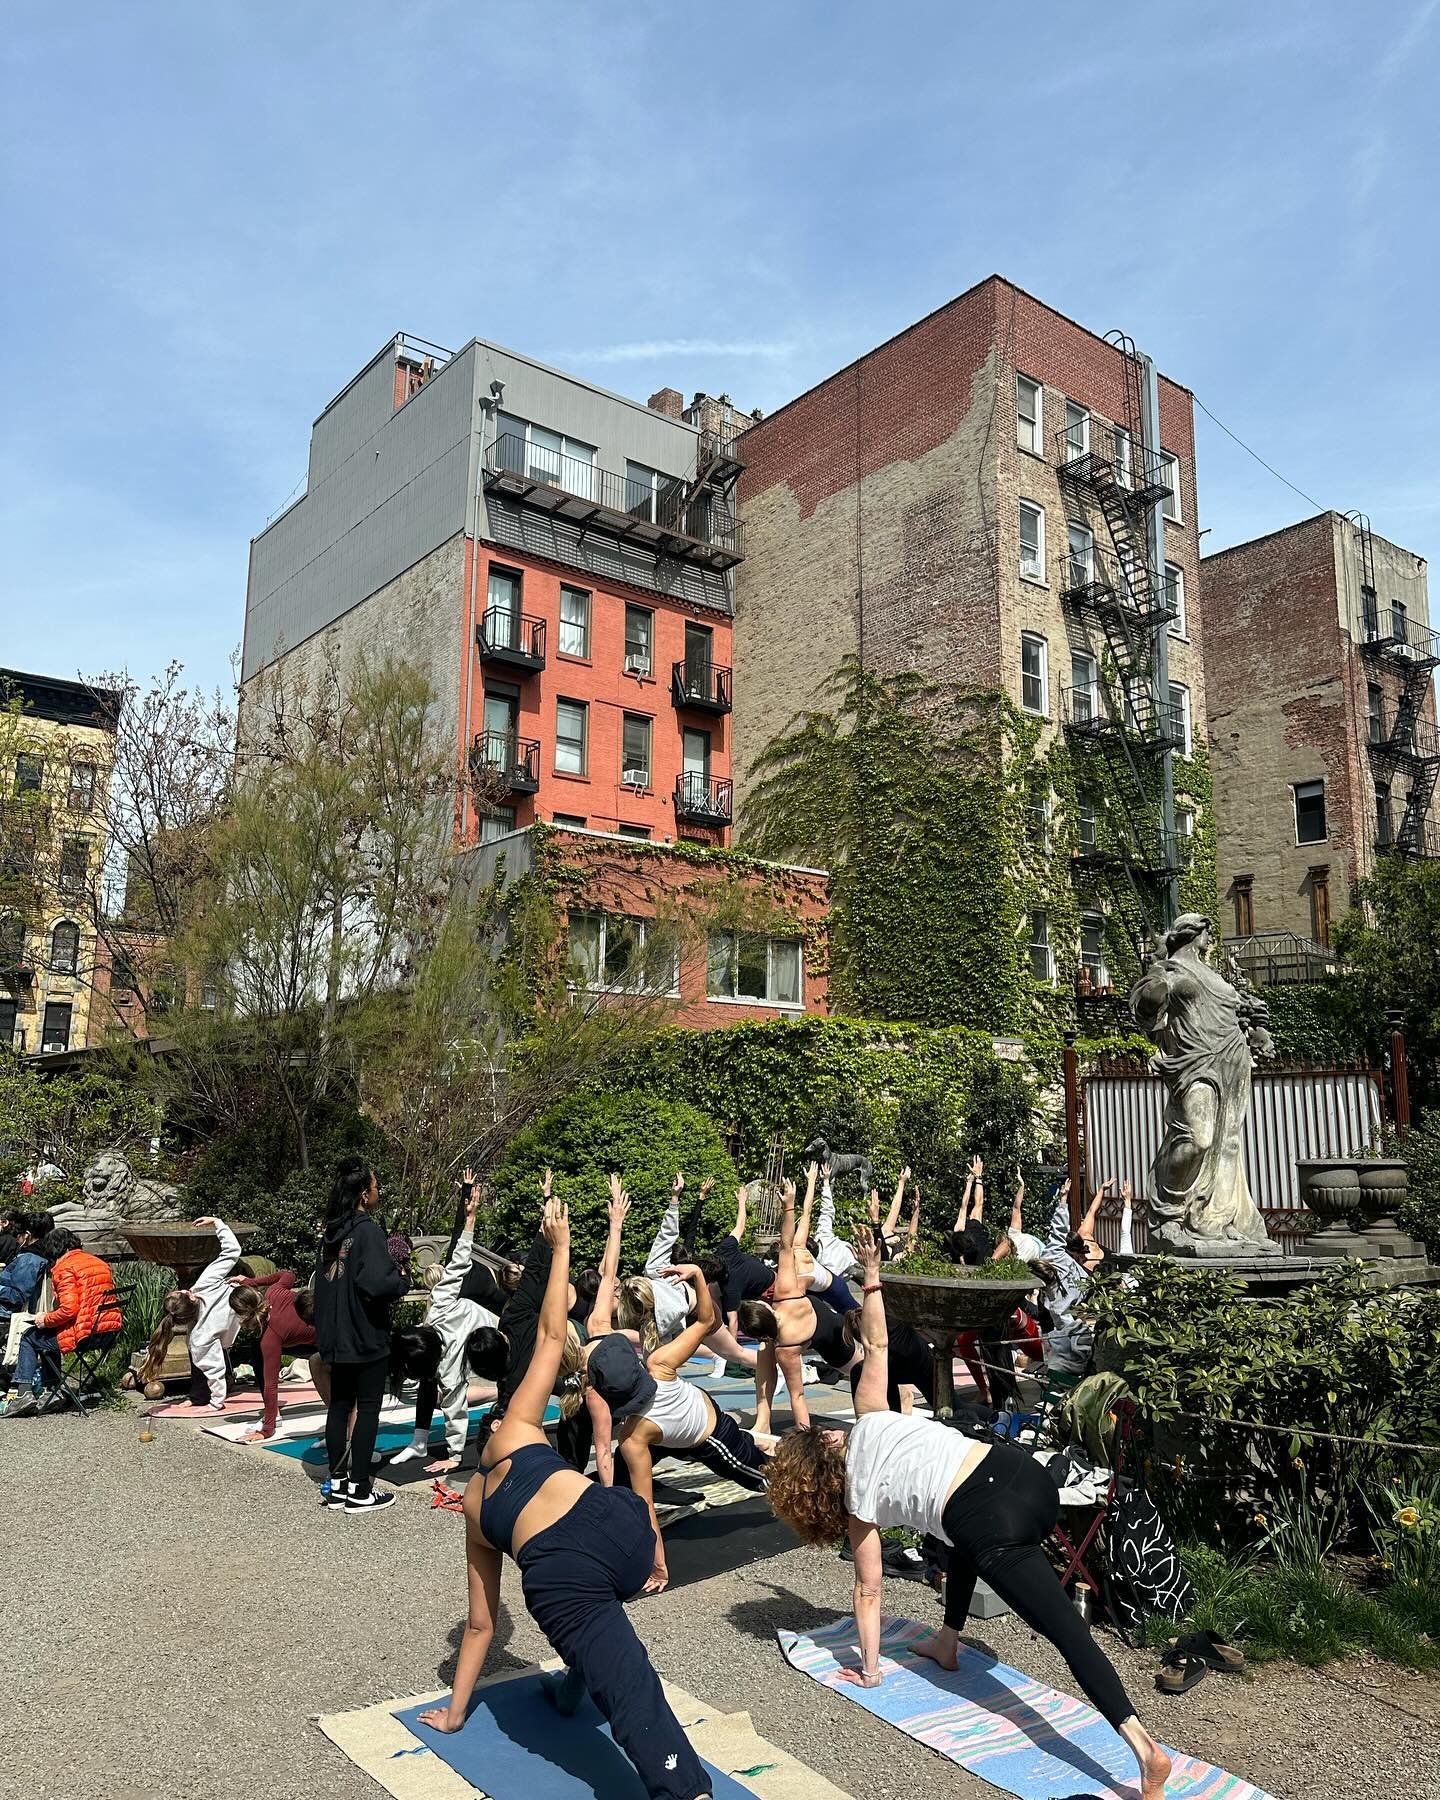 Wellness weekends in the garden ✨🌿

Yoga w/ @goodcheech - Saturdays at 10:30am 
Tai Chi w/ @taichisolution - Sundays at 10:30am 

Open to all w/ suggested donations for instructors! 

Taking place on the paved area while we patiently wait for the ti